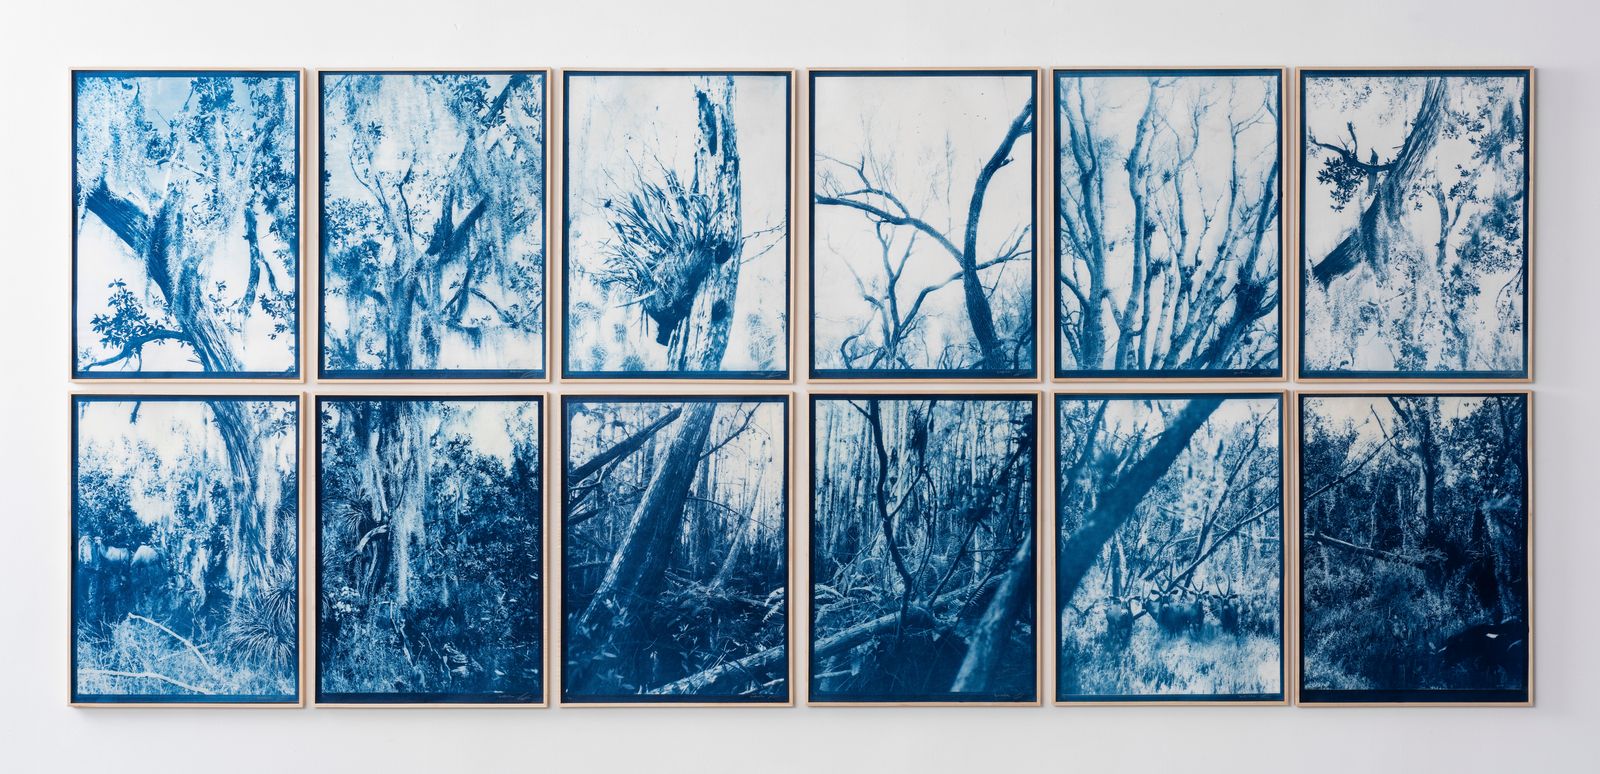 © Itamar Freed - Dream in Blue (polyptych), Cyanotype on Tosa Wasa handmade Japanese paper, 160 X 360 cm or 80 x 60 cm each